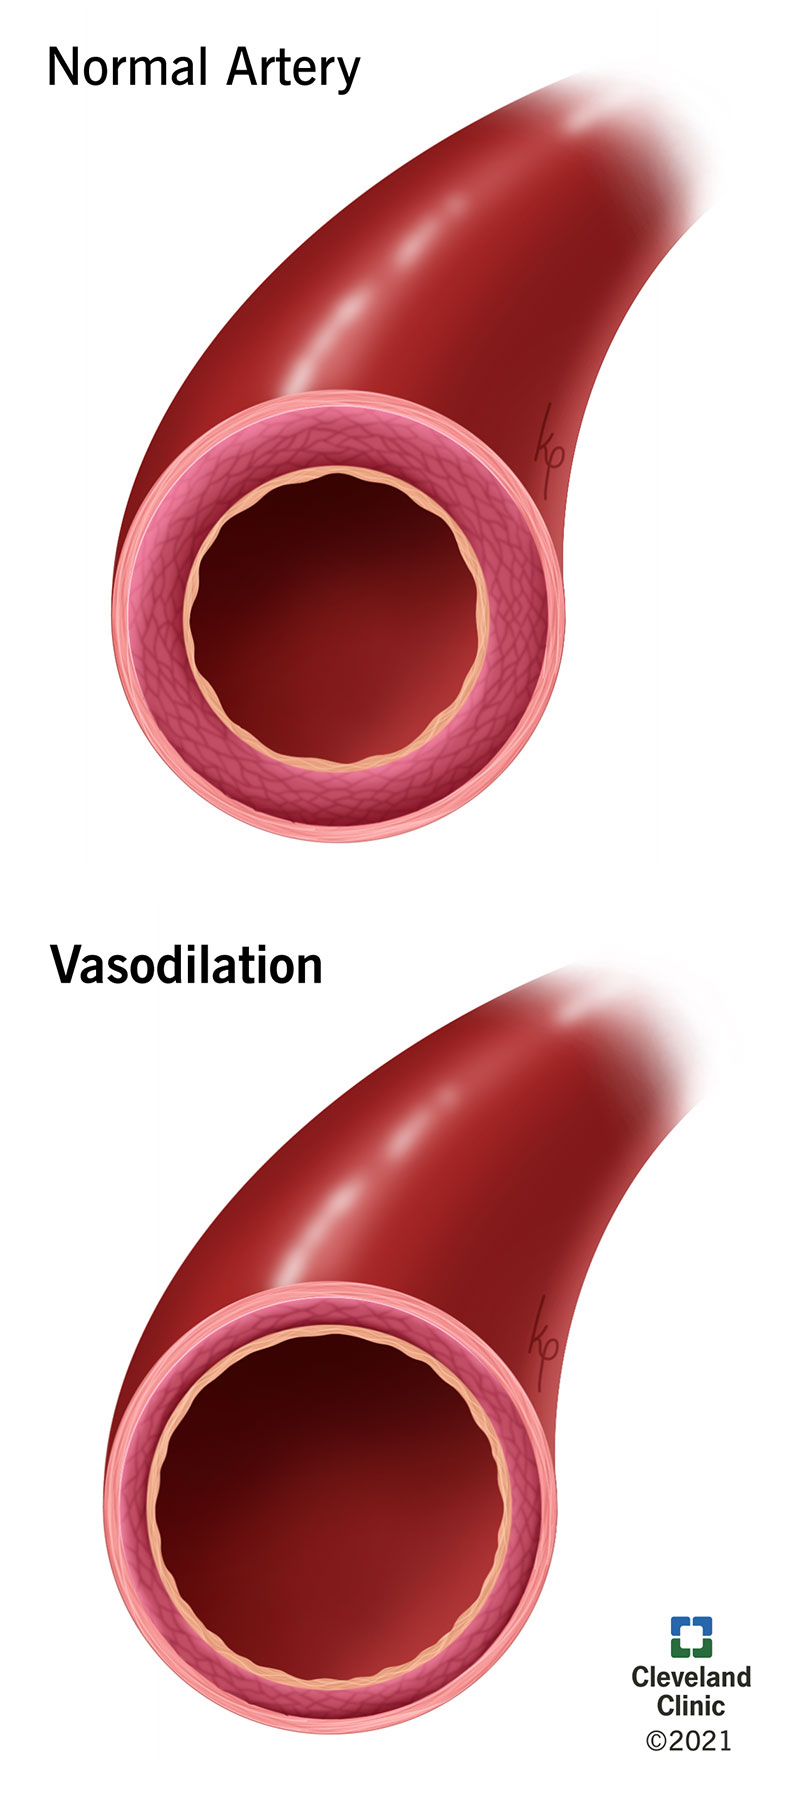 Vasodilation causes an affected blood vessel to widen, allowing more blood to flow through.